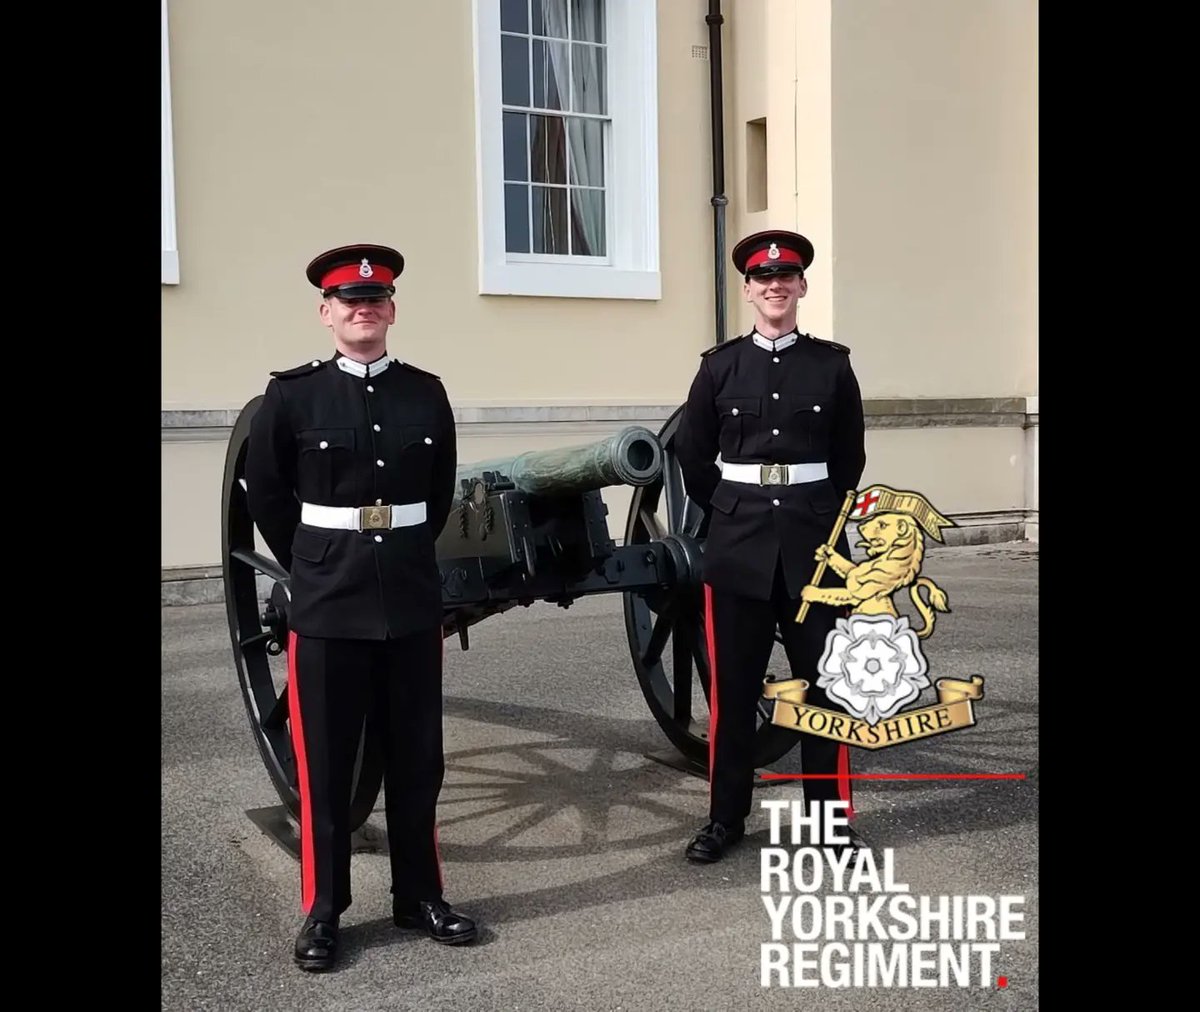 Welcome to Yorkshire's Infantry to two new Officers, commissioned yesterday at @rmasandhurst. Seen here with Colonel Nigel Rhodes. 2nd Lieutenant Max House and 2nd Lieutenant Ben Duncalfe. @britisharmy @armyleadership @_desert_rats_ #fortunefavoursthebrave #yorkshire #Infantry